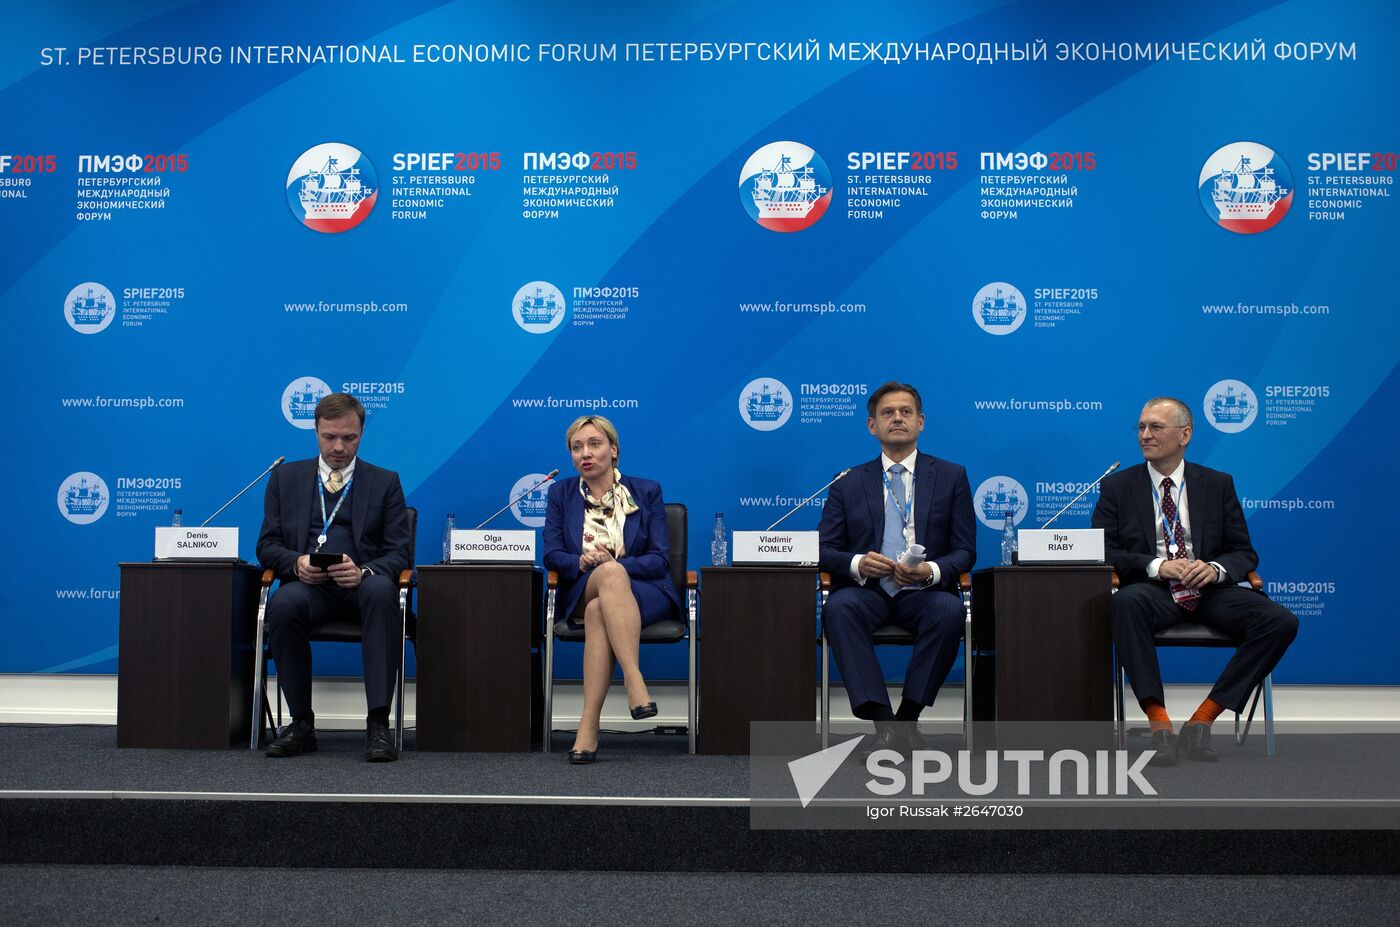 Briefing "A National Payment Card System -- a Step Towards Strengthening Stability" at 19th SPIEF